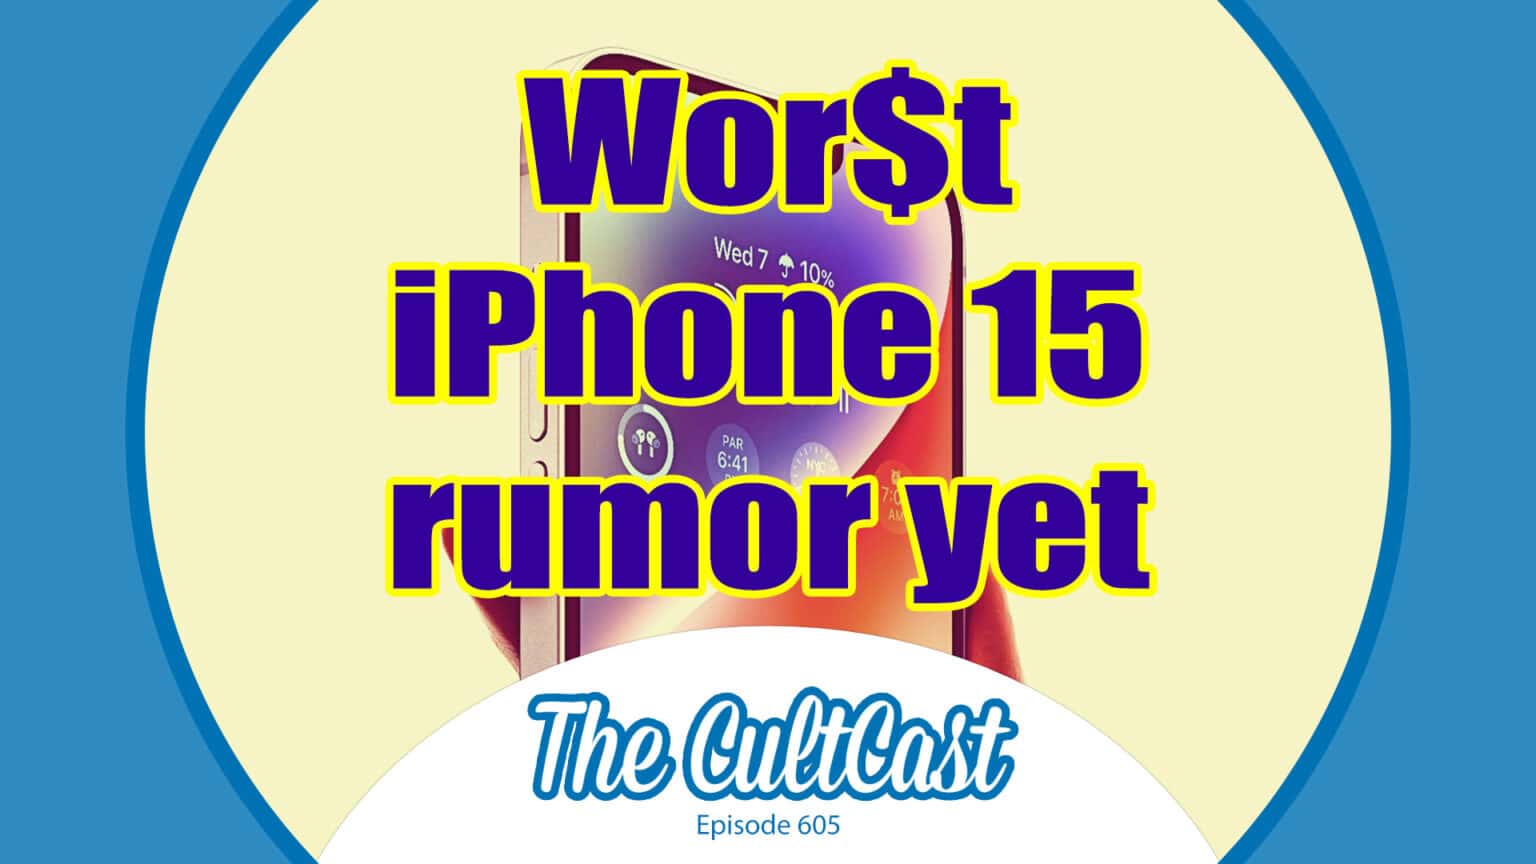 Wor$t iPhone 15 rumor yet! With The CultCast logo, episode 605.